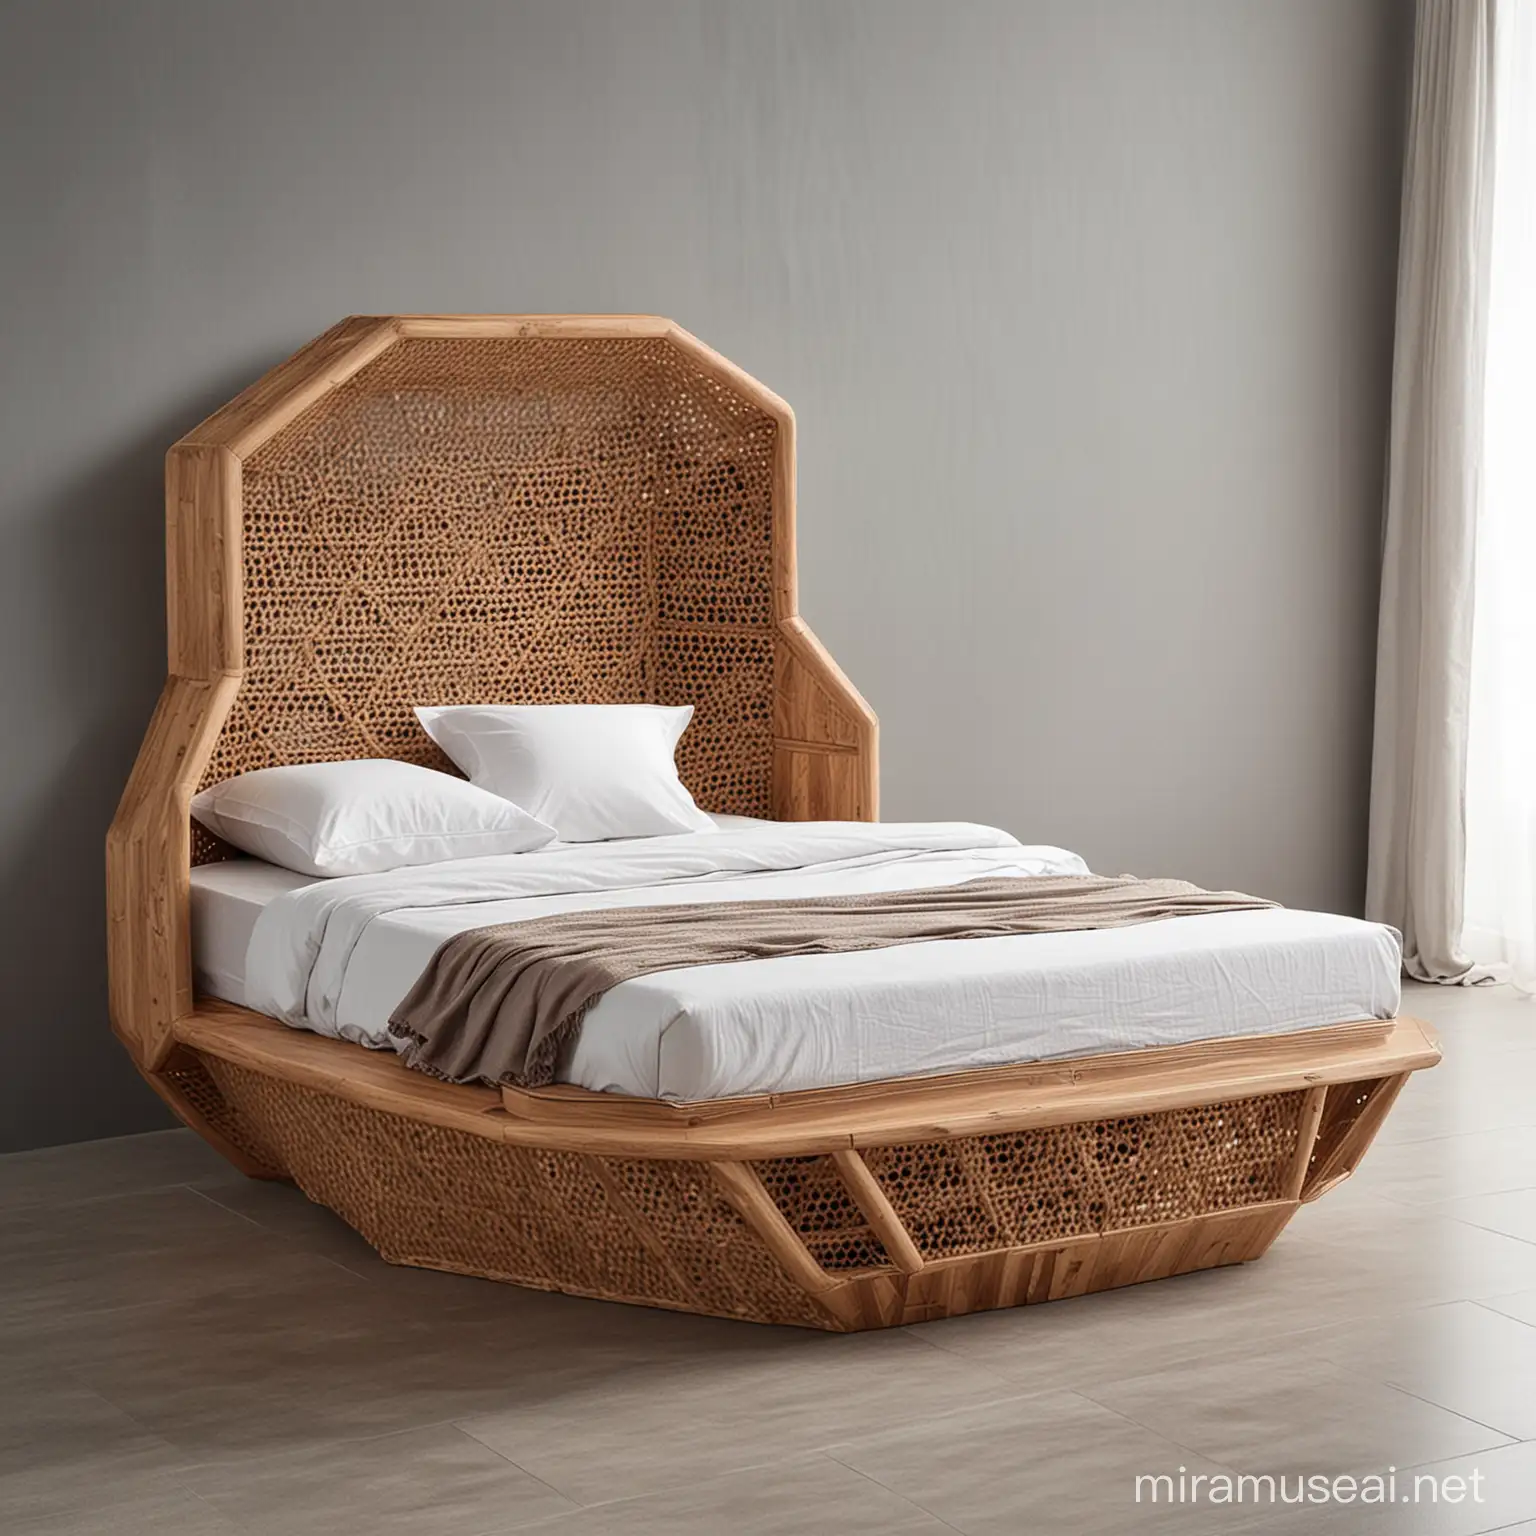 unique and modern single bed with rattan and wood material hexagon shape